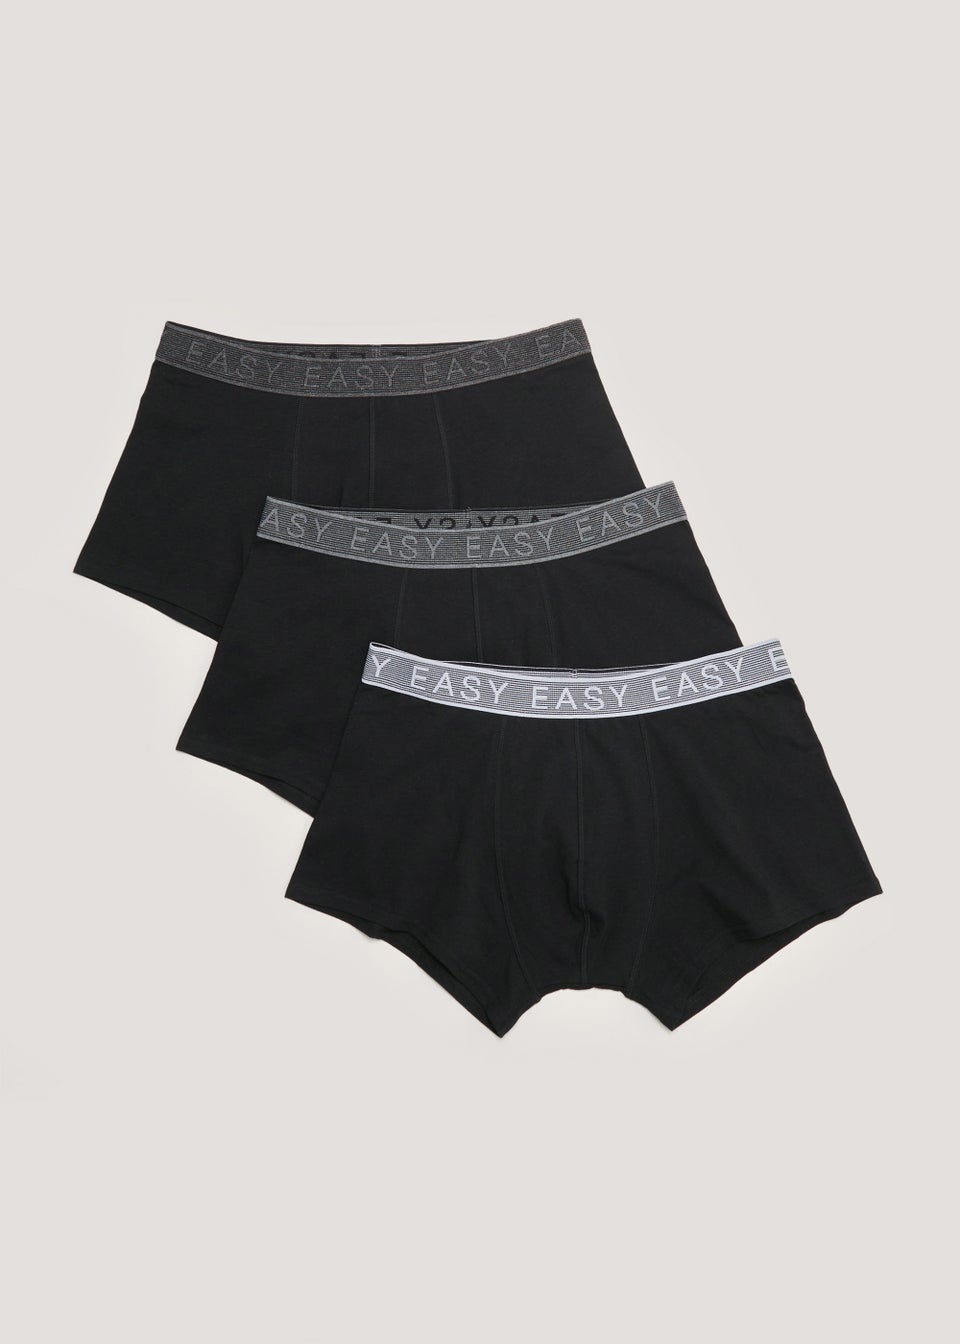 3 Pack Black Hipster Boxers